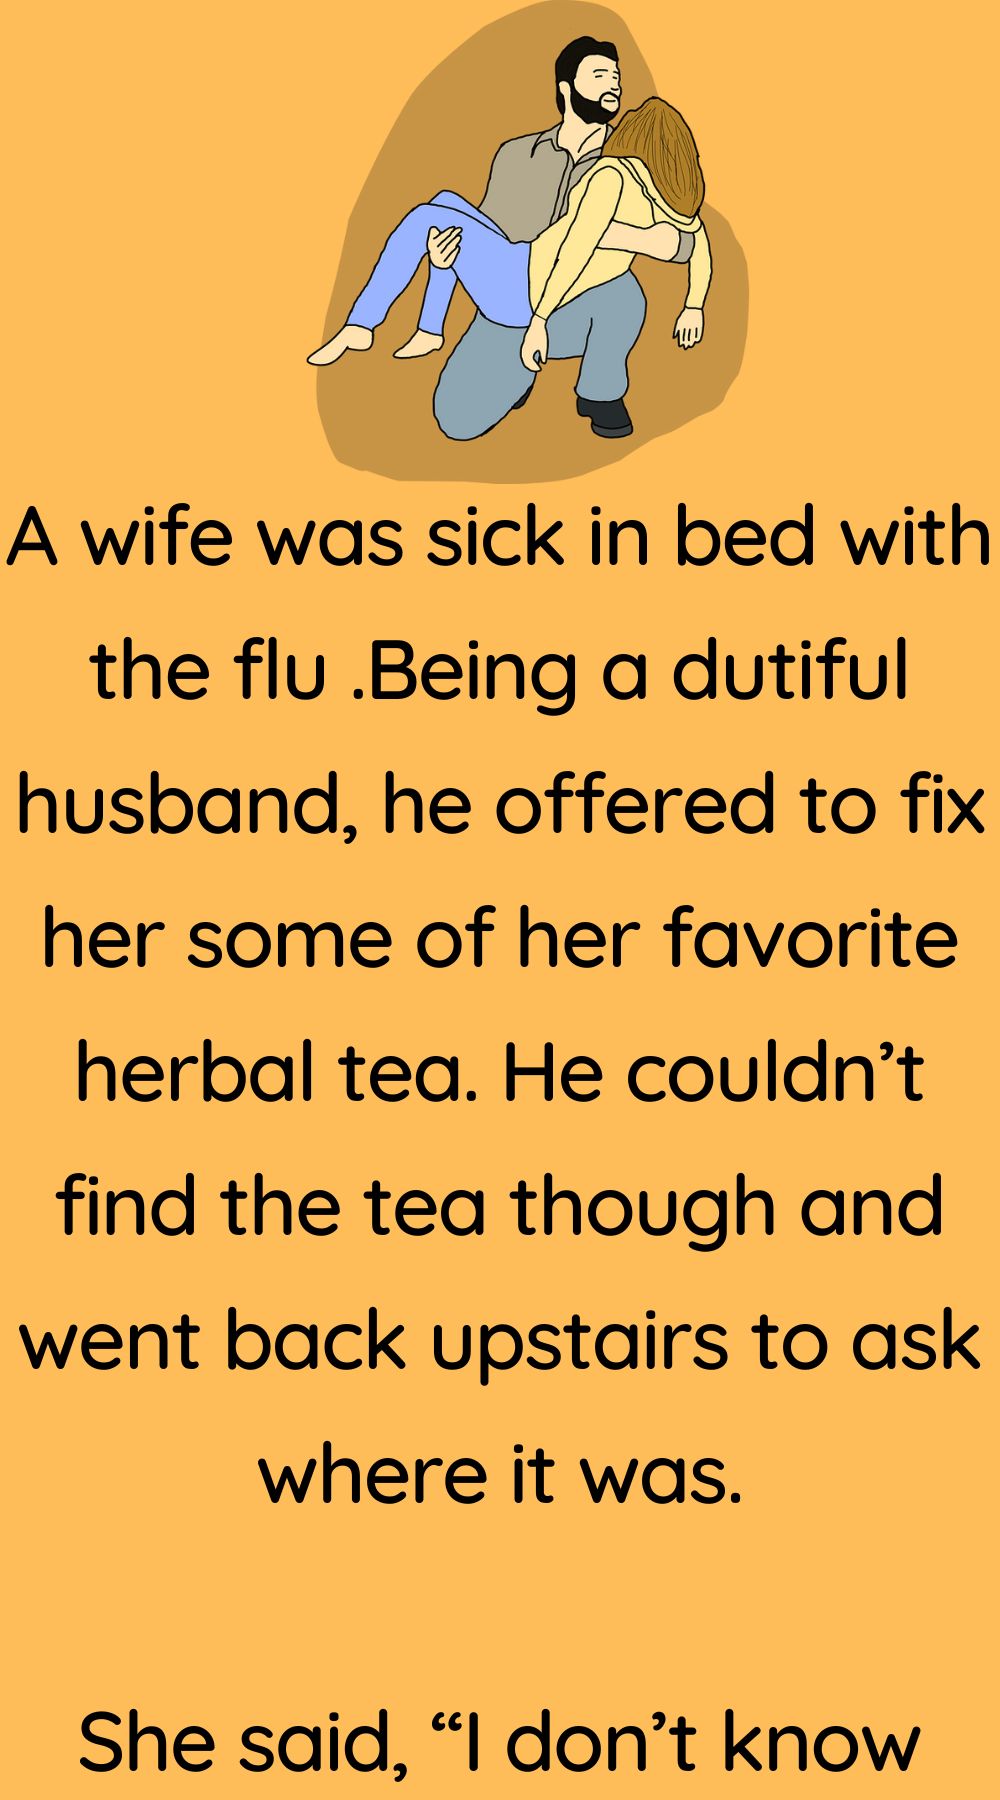 A wife was sick in bed with the flu